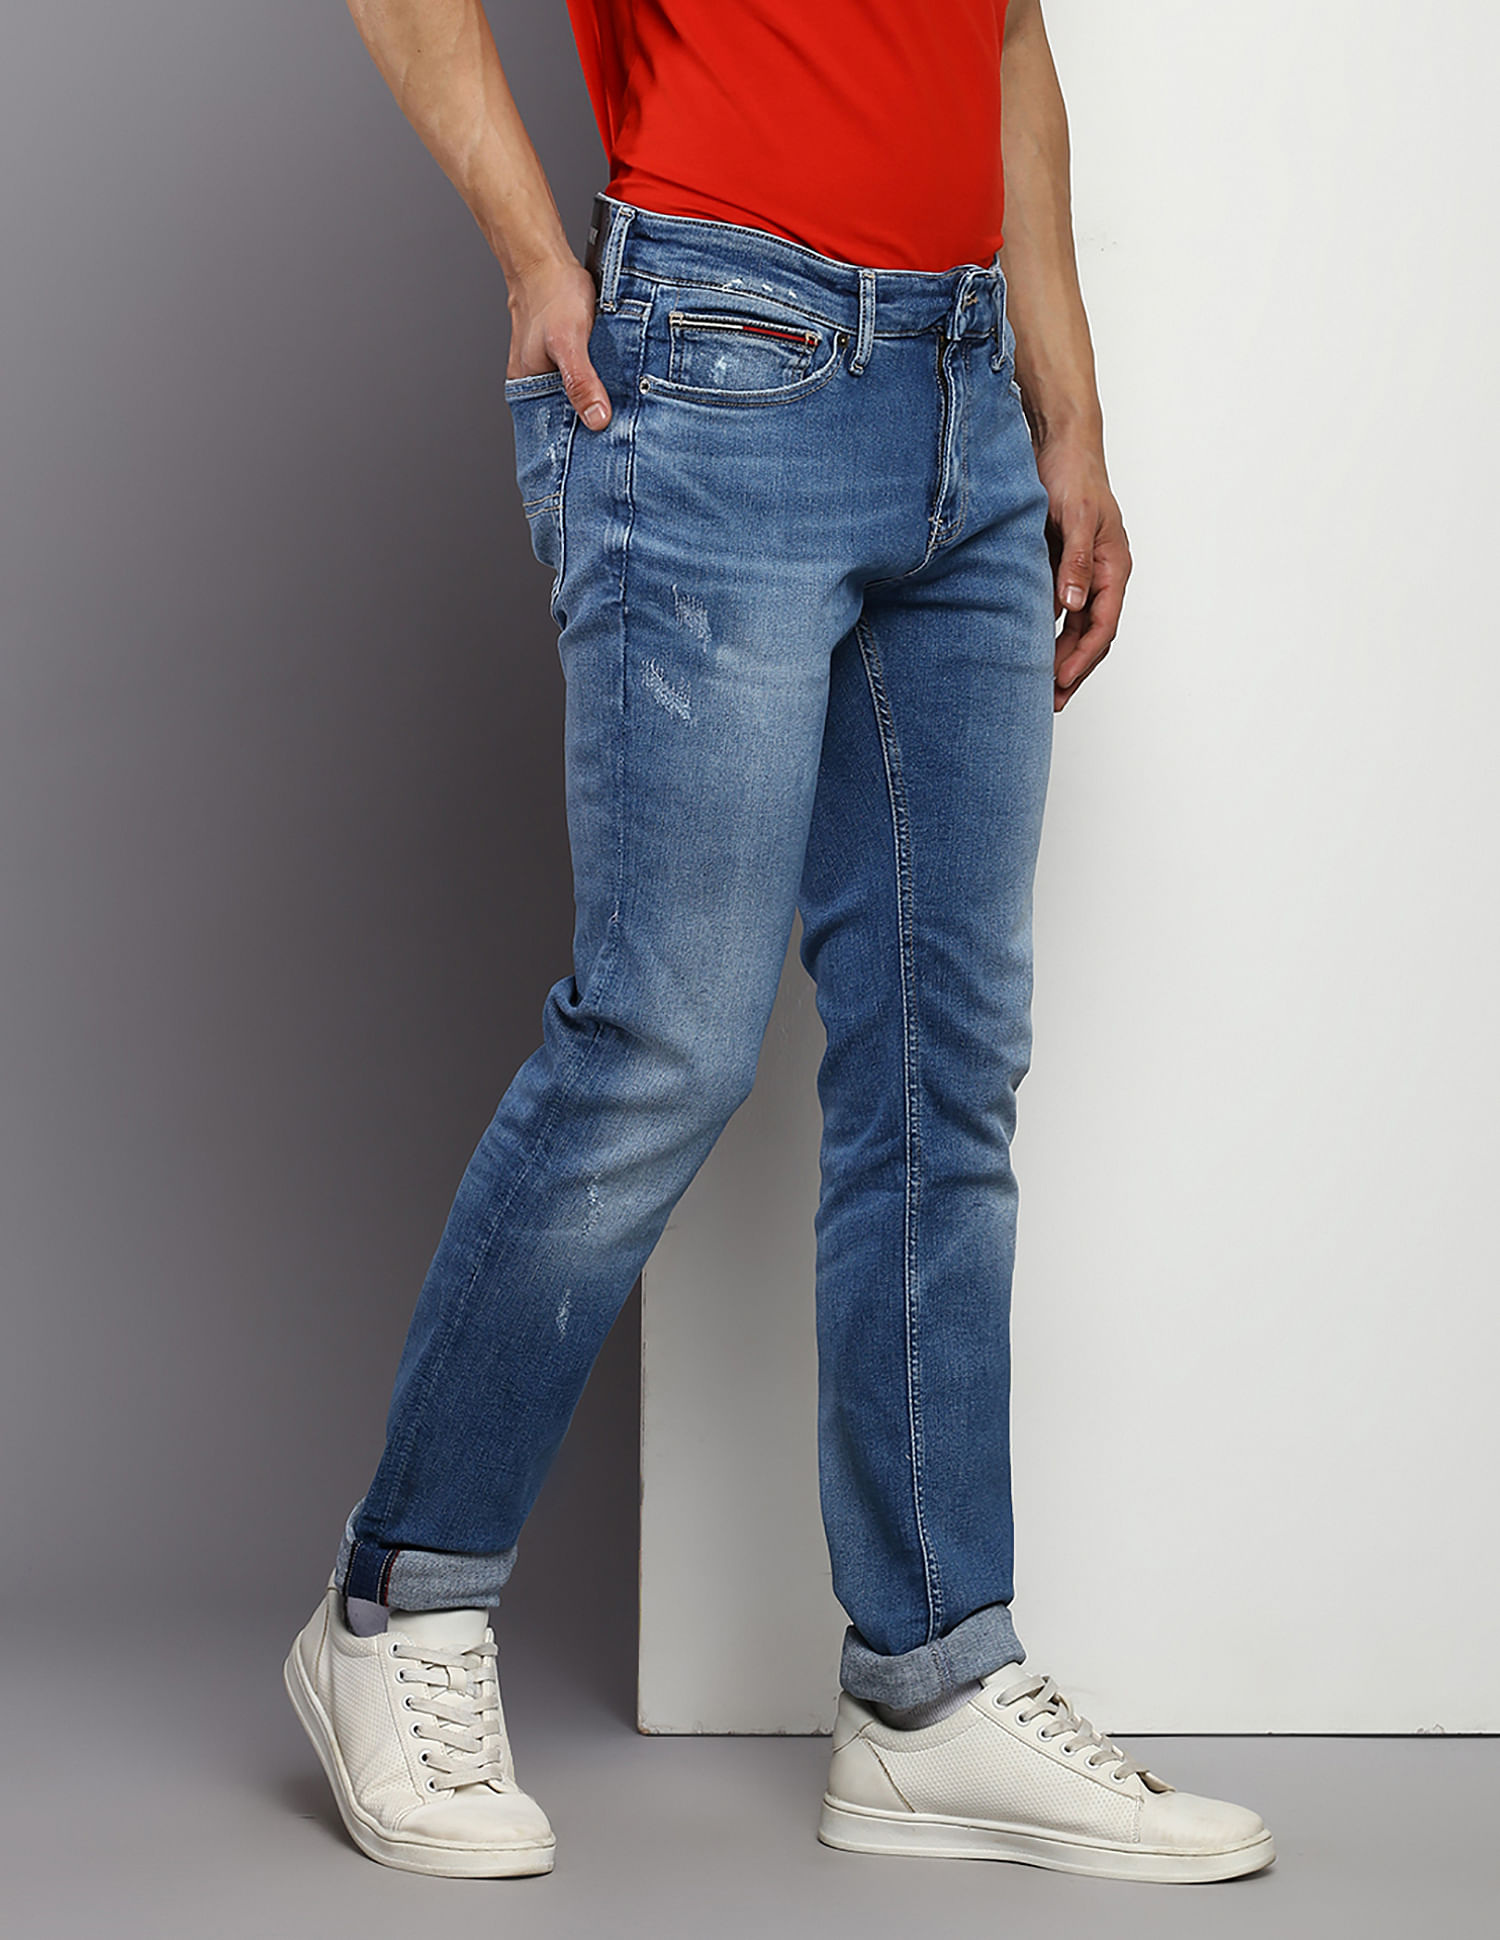 Buy Tommy Hilfiger Scanton Fit Distressed Jeans - NNNOW.com